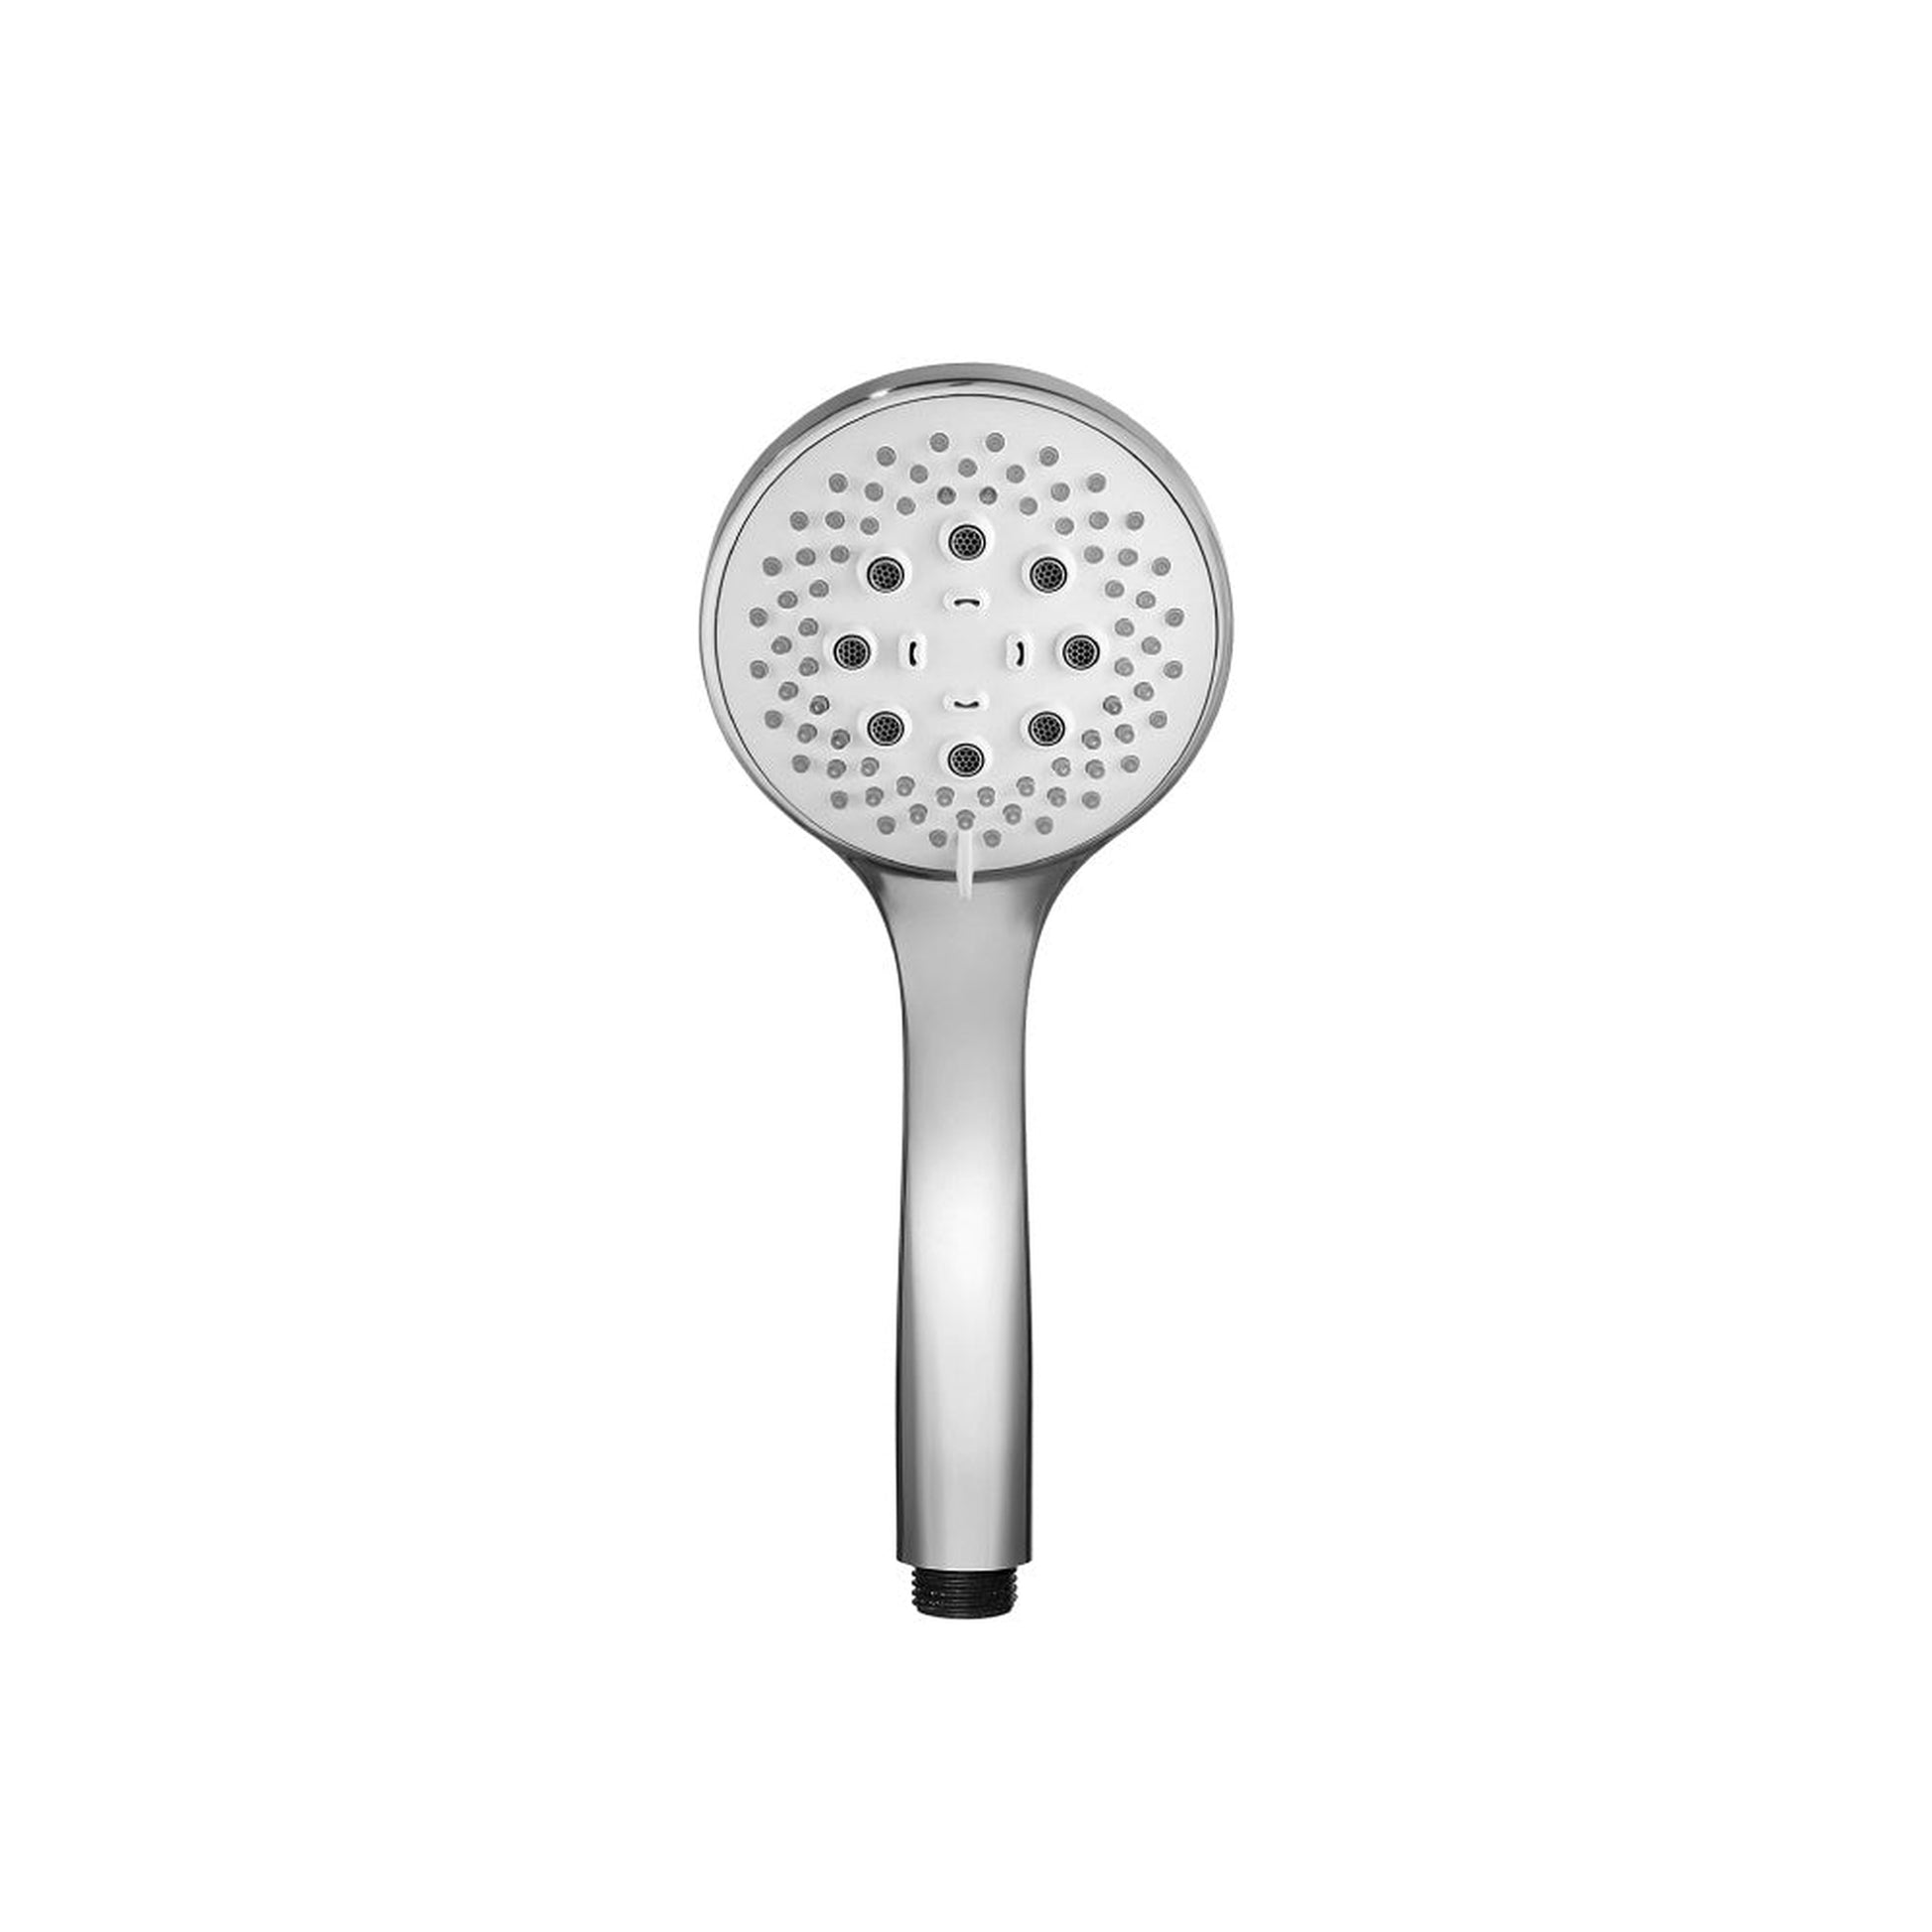 Isenberg Universal Fixtures 3-Function 100MM ABS Hand Held Shower Head in Chrome